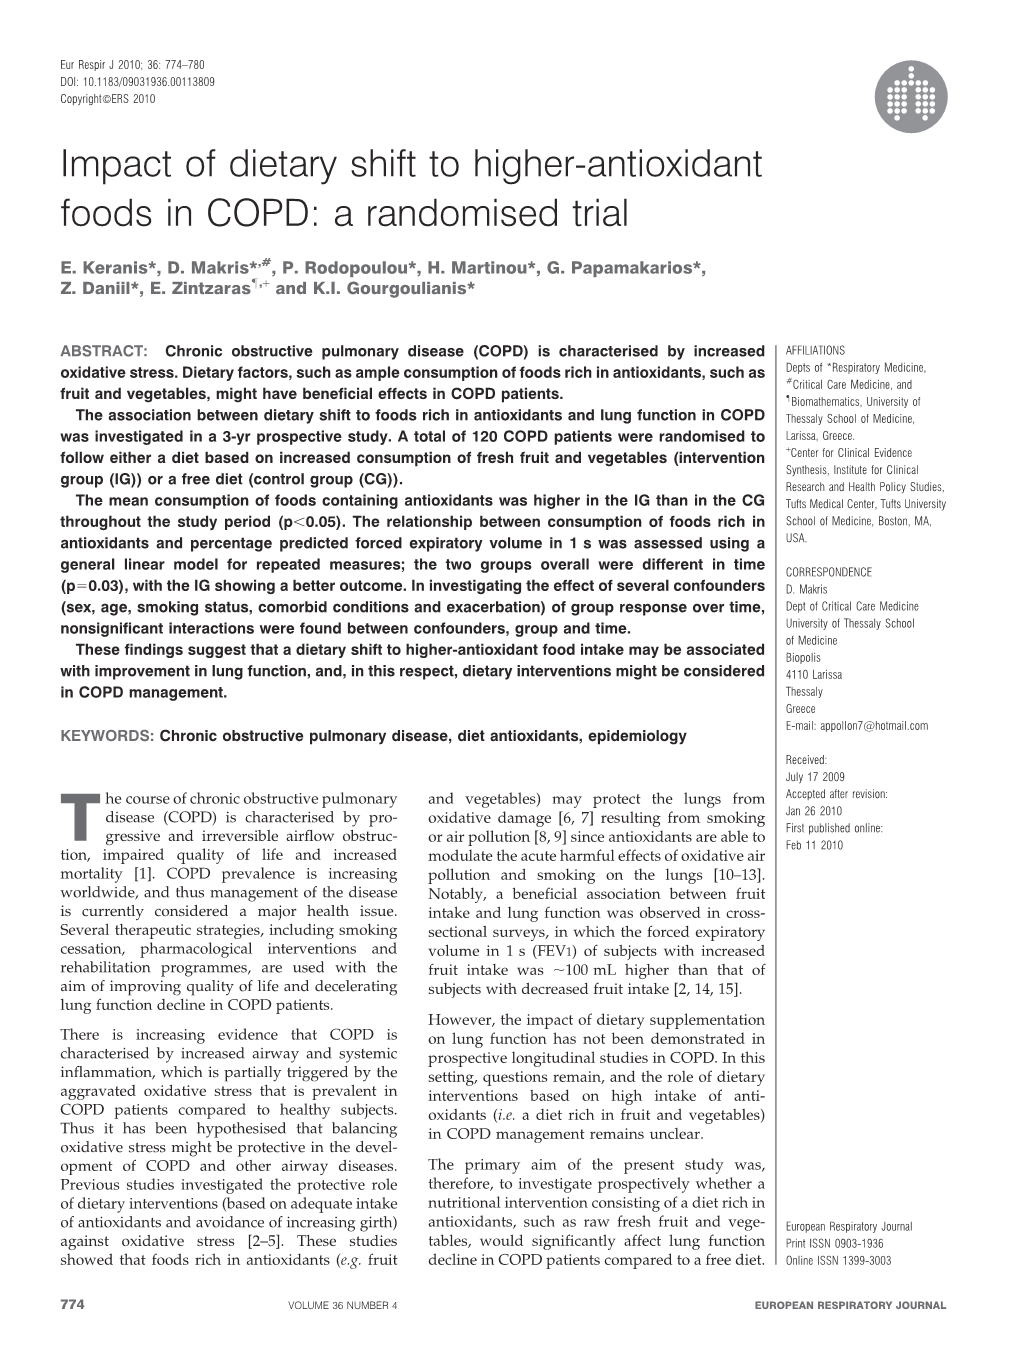 Impact of Dietary Shift to Higher-Antioxidant Foods in COPD: a Randomised Trial